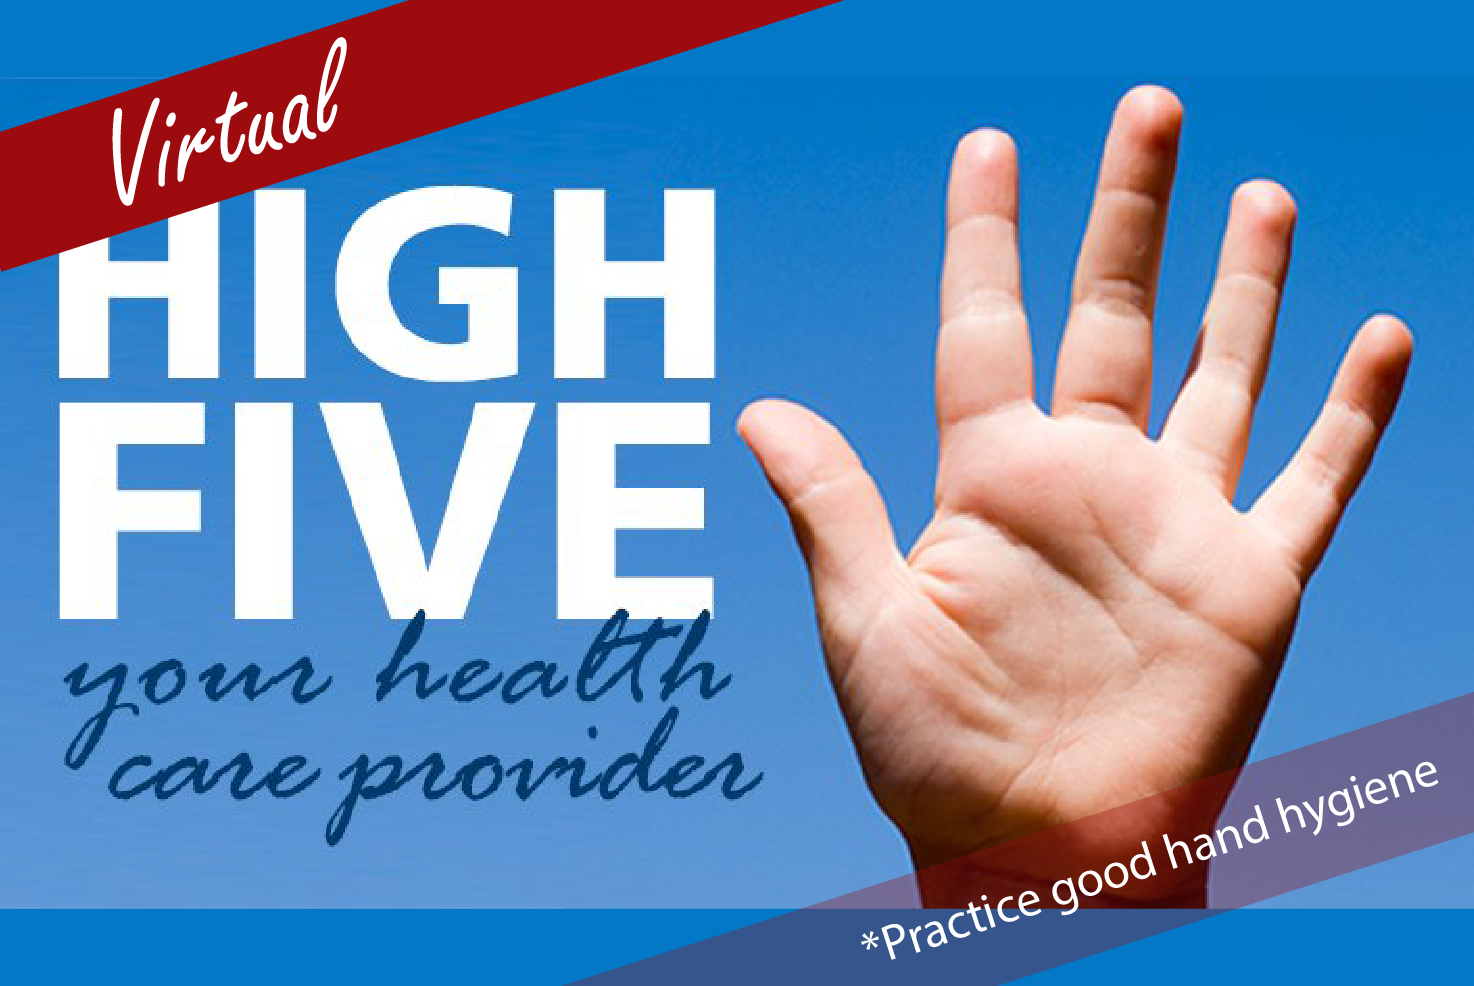 High five your health care provider graphic